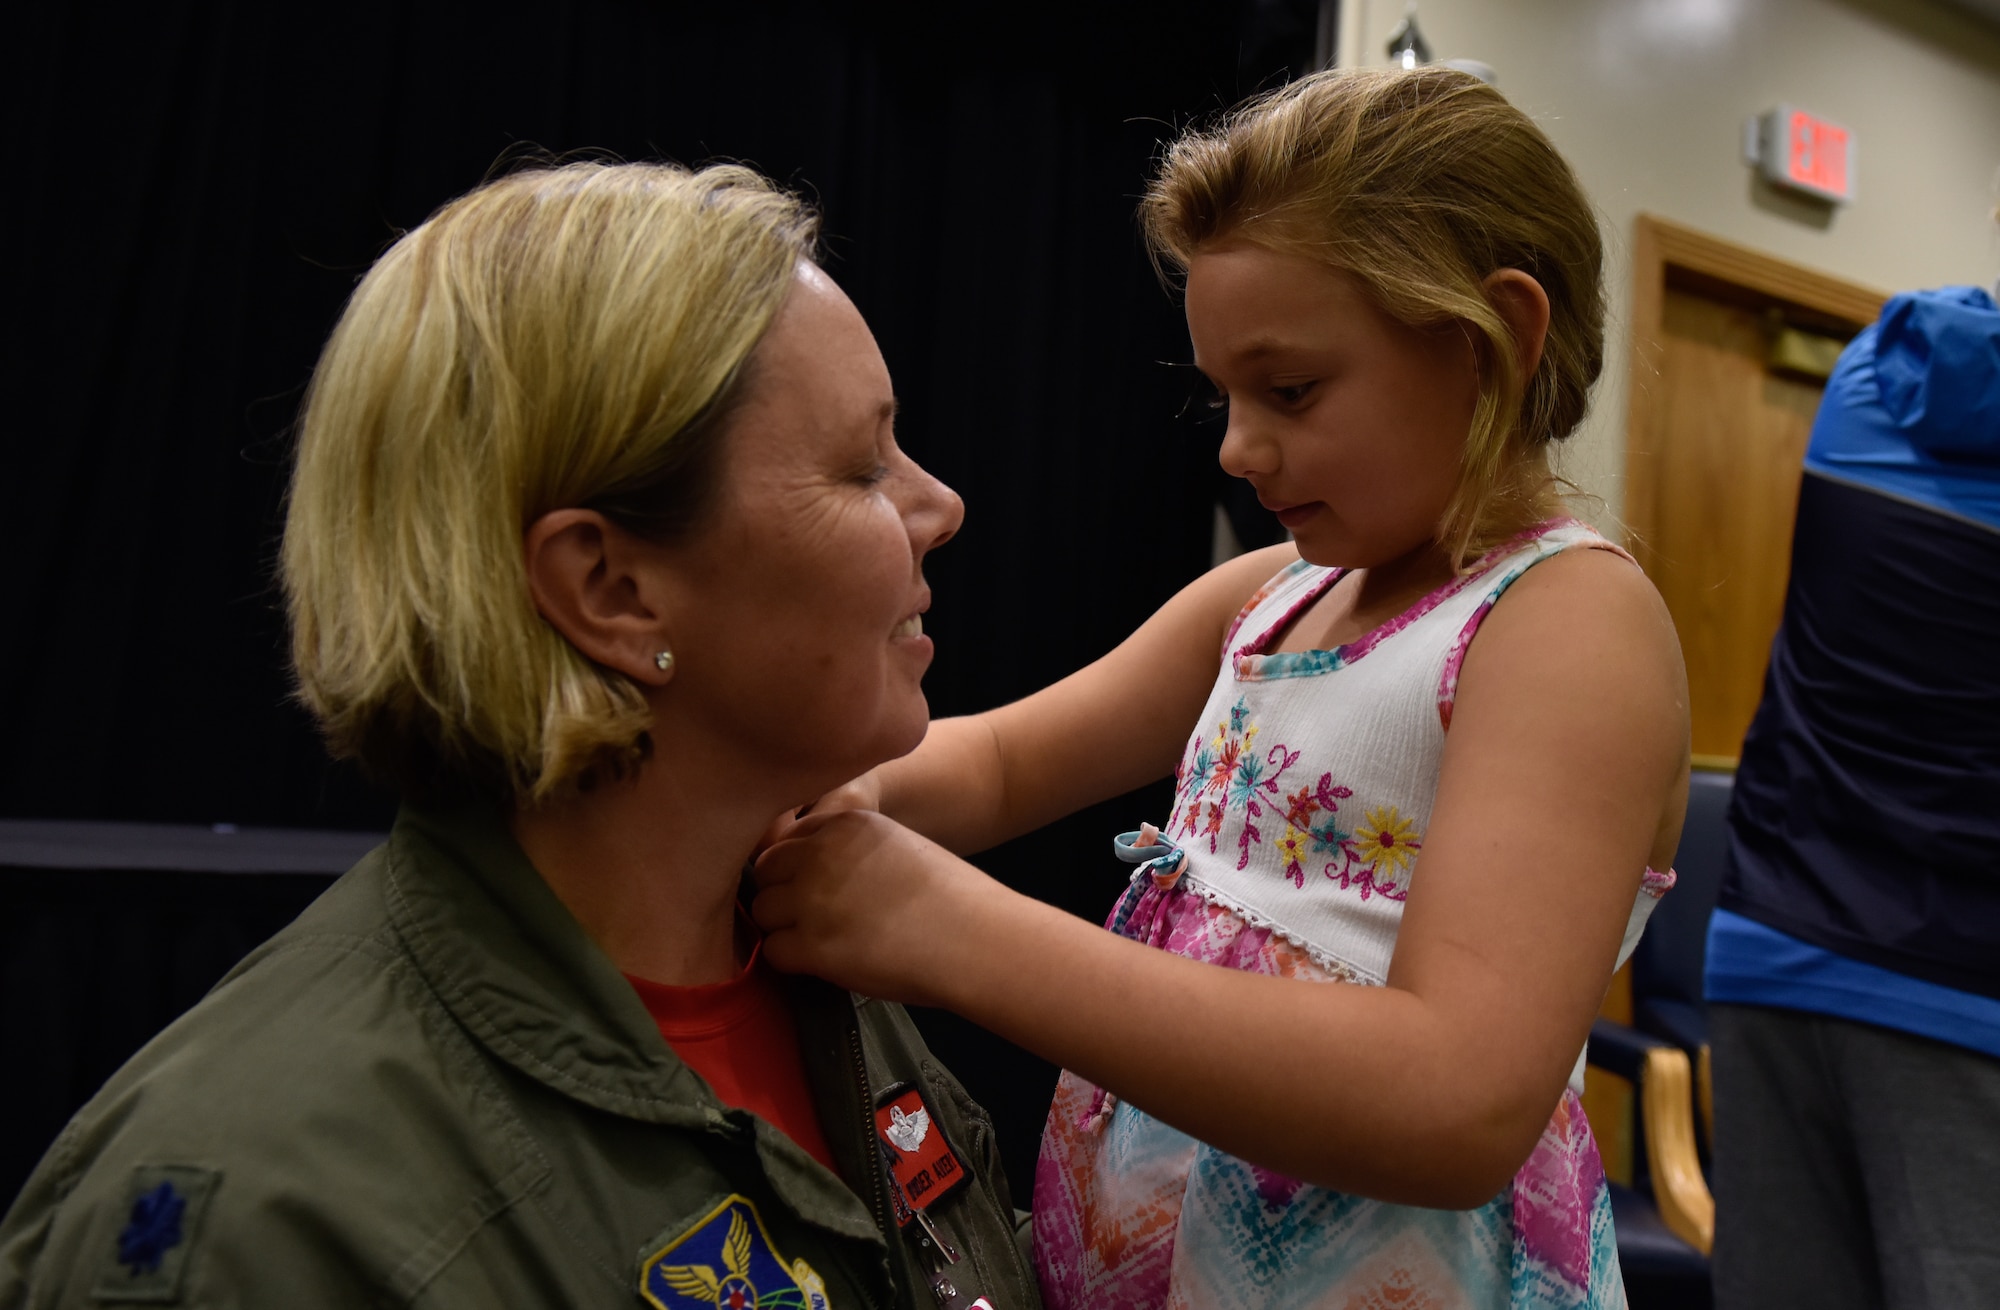 U.S. Air Force Lt. Col. Jennifer Avery receives her retirement pin from her daughter Elizabeth during a retirement ceremony Sept. 7, 2018, at Whiteman Air Force Base, Missouri. Avery was the first female to the fly the B-2 Spirit. She is the first and only female to fly stealth bomber in combat, and was also the first female to fly the B-1 in combat. She retired from the Air National Guard's 131st Bomb Wing.(U.S. Air Force photo by Tech. Sgt. Alexander W. Riedel)